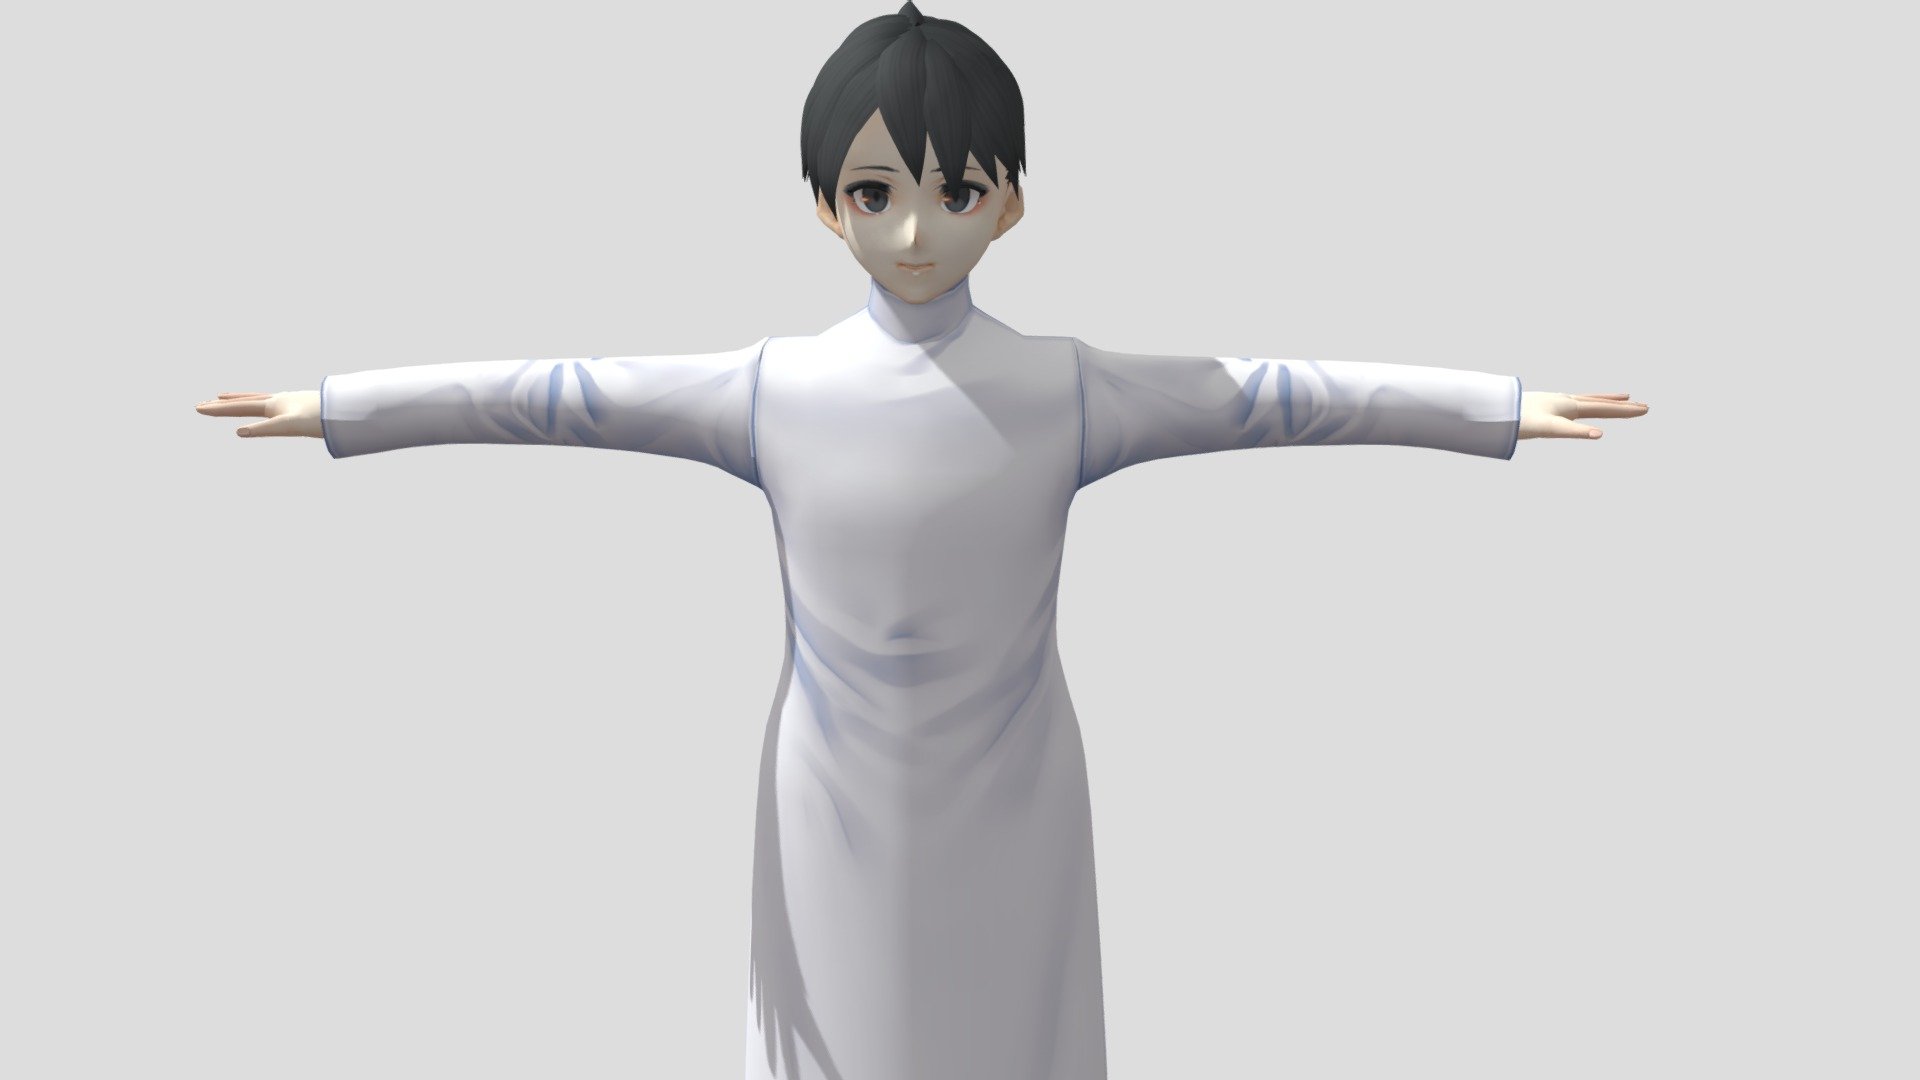 Model preview



This character model belongs to Japanese anime style, all models has been converted into fbx file using blender, users can add their favorite animations on mixamo website, then apply to unity versions above 2019



Character : Yong

Verts:20407

Tris:28928

Fifteen textures for the character



Character : Yong(Uniform)

Verts:19215

Tris:26688

Fifteen textures for the character



This package contains VRM files, which can make the character module more refined, please refer to the manual for details



▶Commercial use allowed

▶Forbid secondary sales



Welcome add my website to credit :

Sketchfab

Pixiv

VRoidHub
 - 【Anime Character】Yong (Two Type/Unity 3D) - Buy Royalty Free 3D model by 3D動漫風角色屋 / 3D Anime Character Store (@alex94i60) 3d model